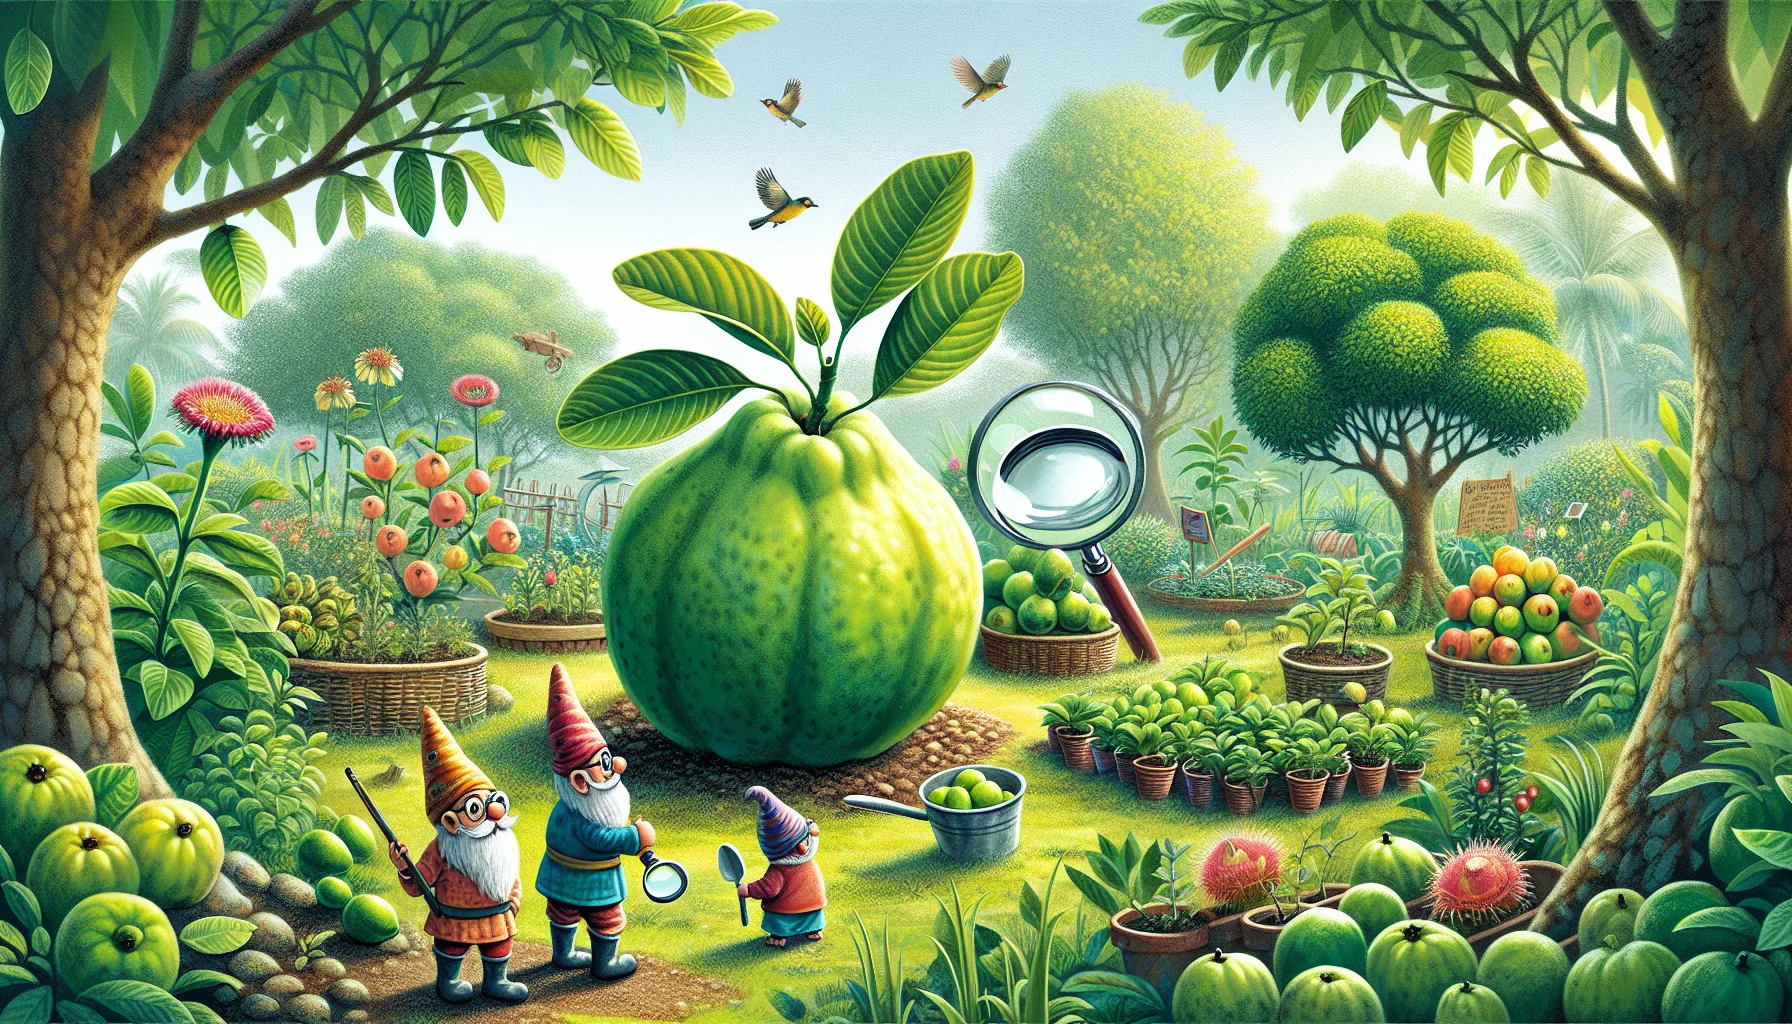 Create a comical and realistic scenario that captures when a guava fruit is ripe and ready to be eaten. The scene should take place in a lush garden filled with a variety of thriving plants, making it a paradise for gardening enthusiasts. There may be a few garden gnomes around, who appear to be inspecting the guava with magnifying glasses, and some birds tweeting cheerfully from the trees above. This cheerful and amusing depiction should stimulate people's interest in gardening and the joy of growing and harvesting their own fruit.